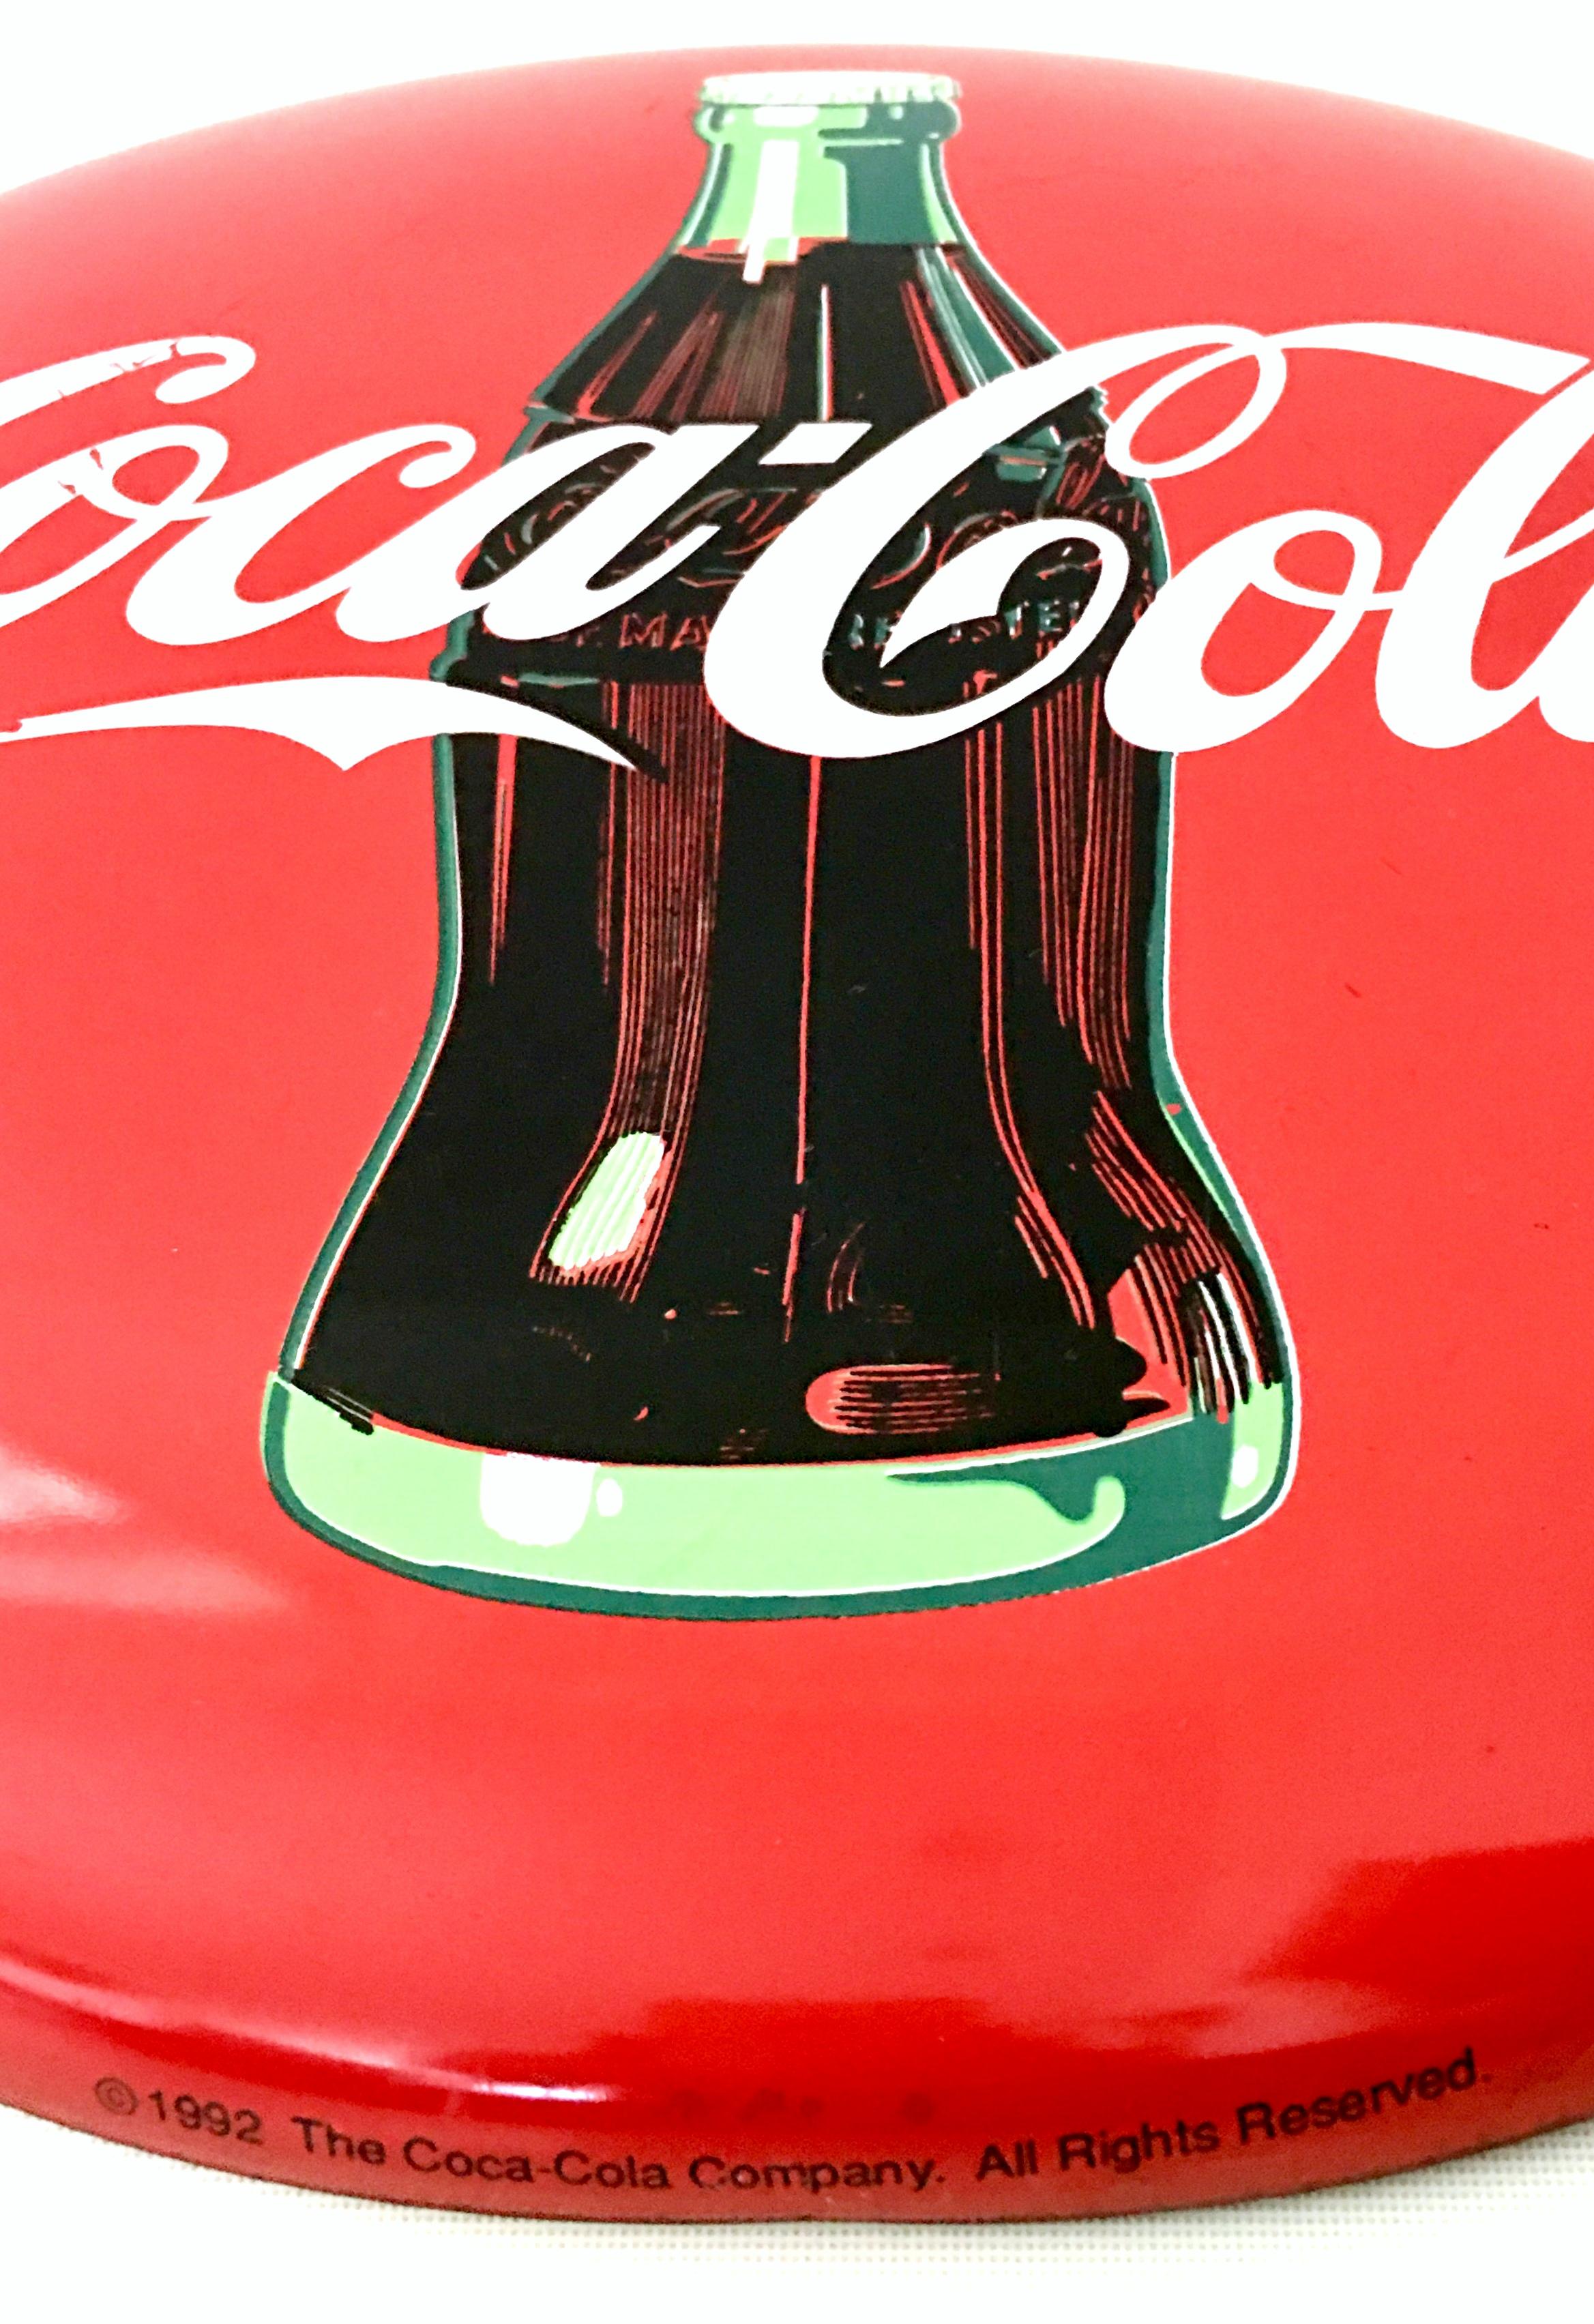 Metal 20th Century Coca-Cola Enamel Iron Button and Bottle Advertising Sign-Signed